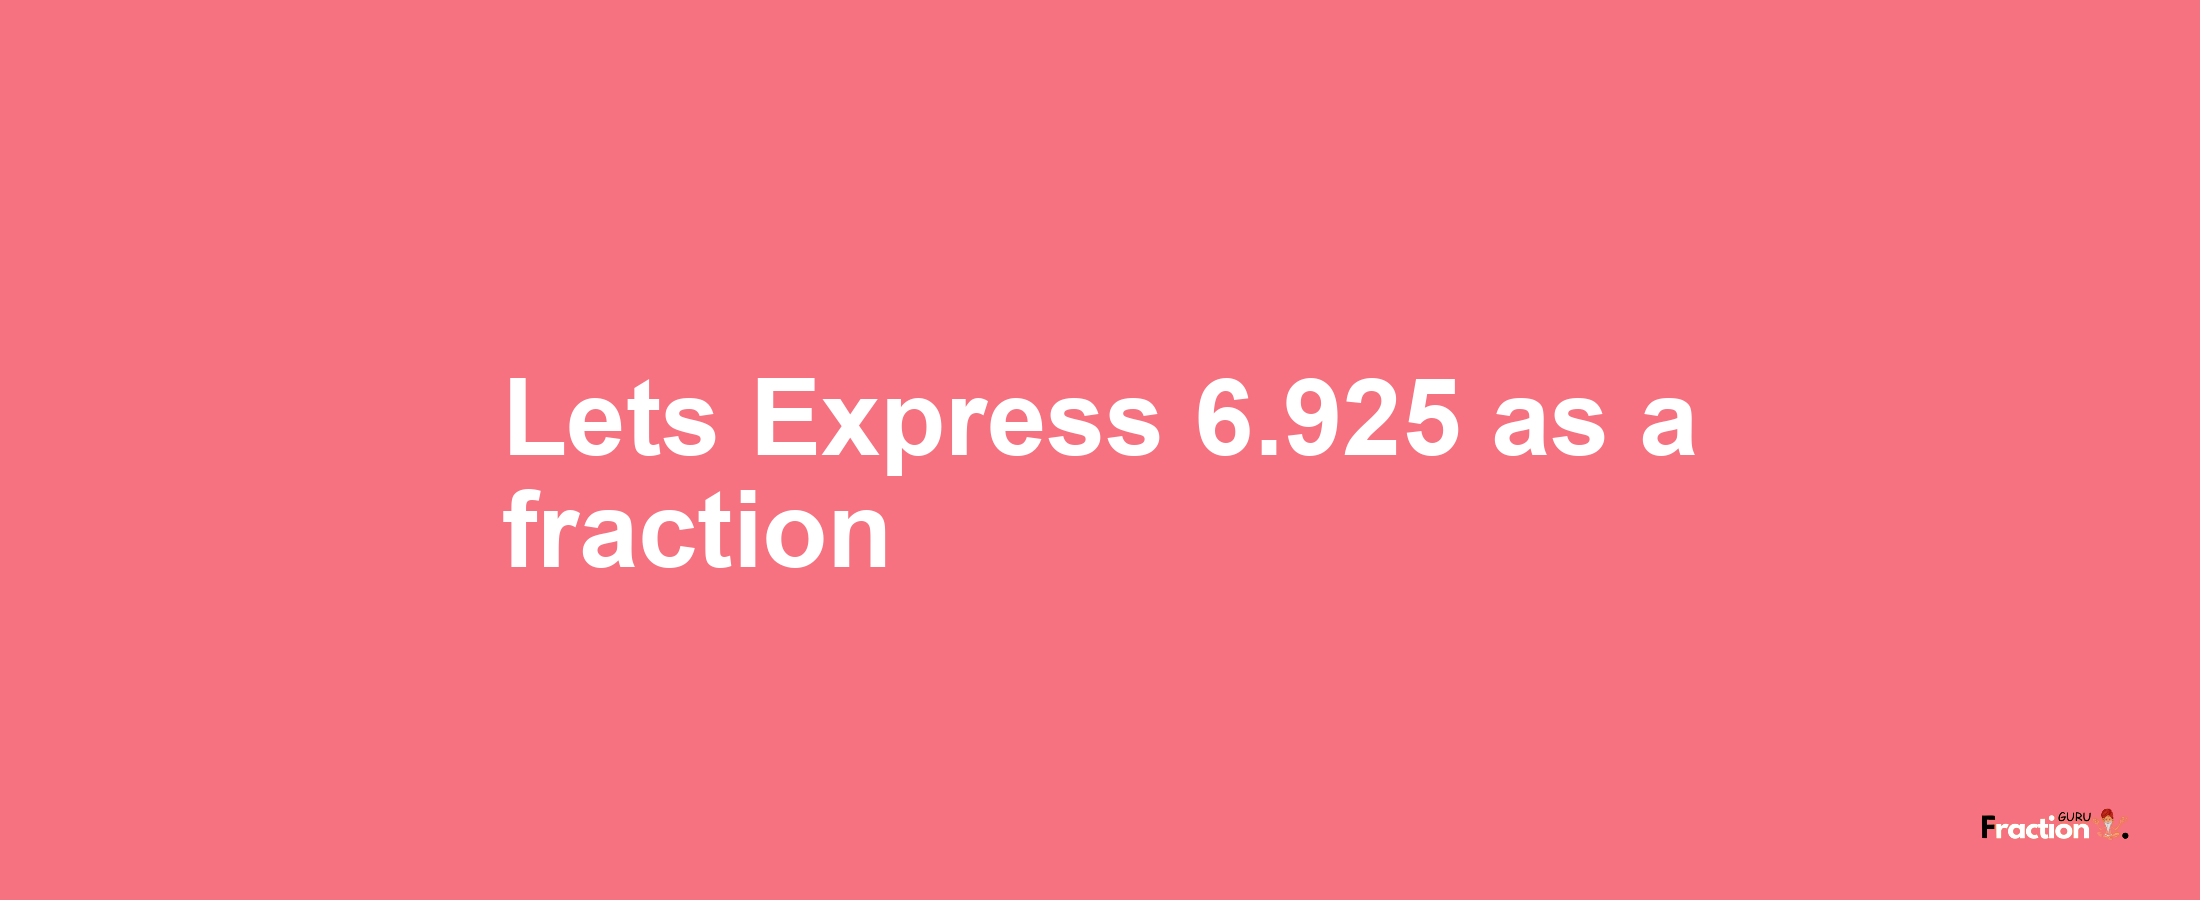 Lets Express 6.925 as afraction